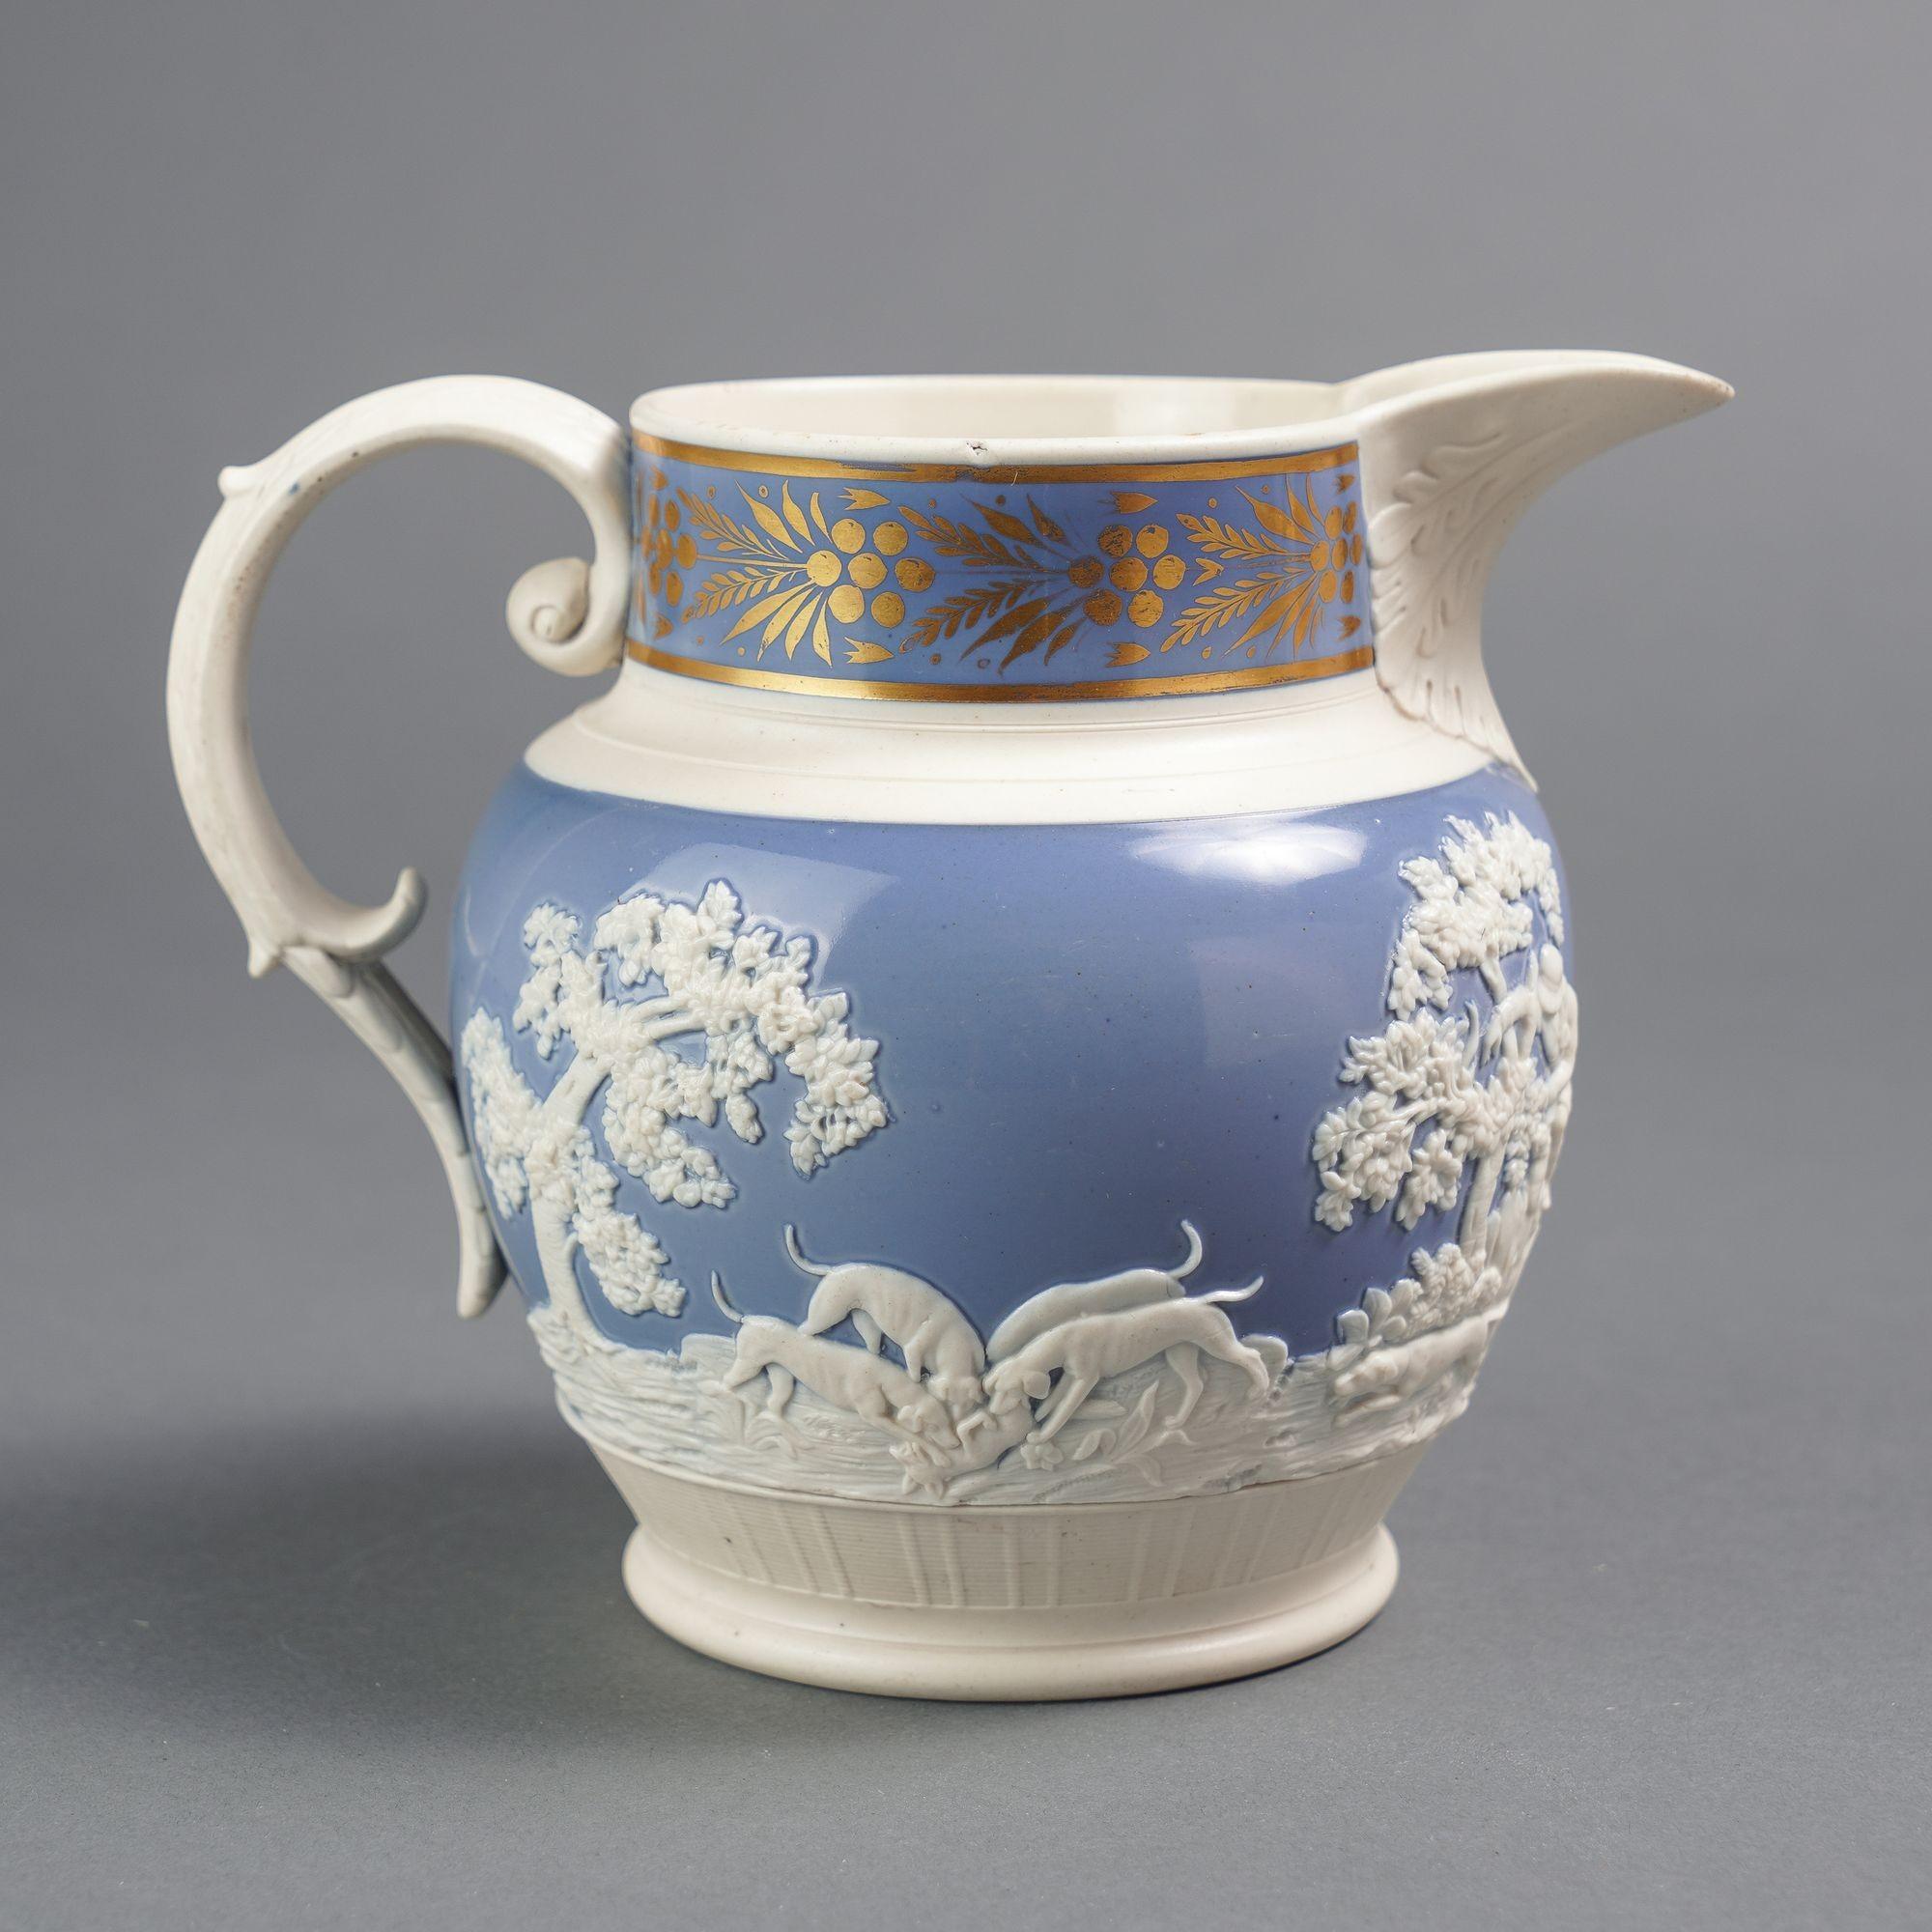 19th Century English stoneware hunt jug by Chetham & Woolley, c. 1793-1821 For Sale